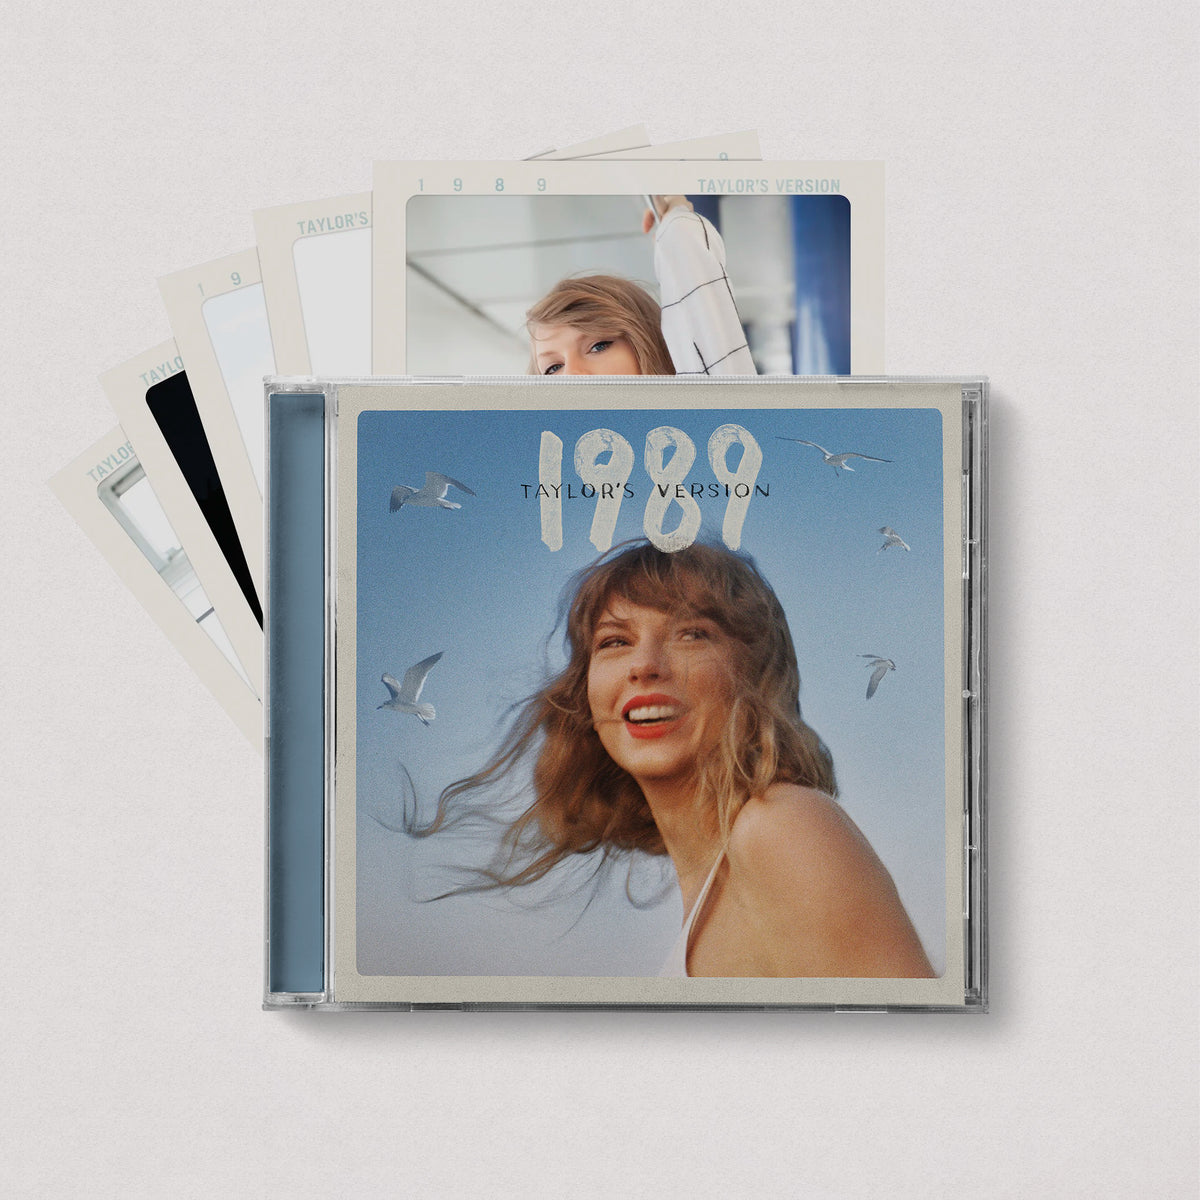 Taylor Swift - 1989 "Taylor's Version" (Crystal Skies Blue Edition, Deluxe CD)